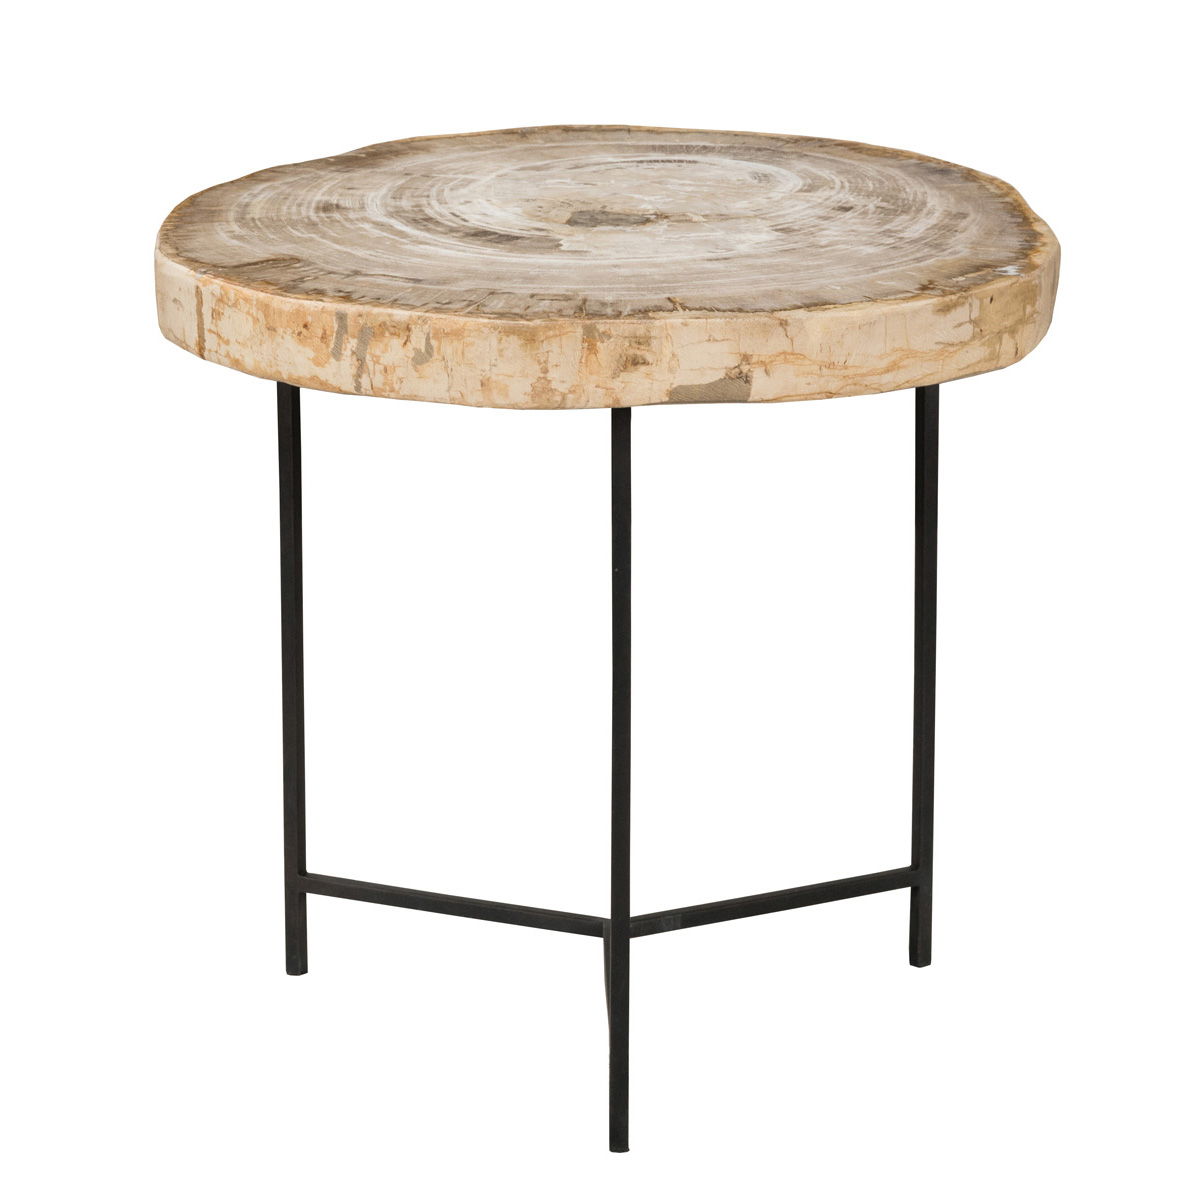 Riley - Petrified Wood Accent Table